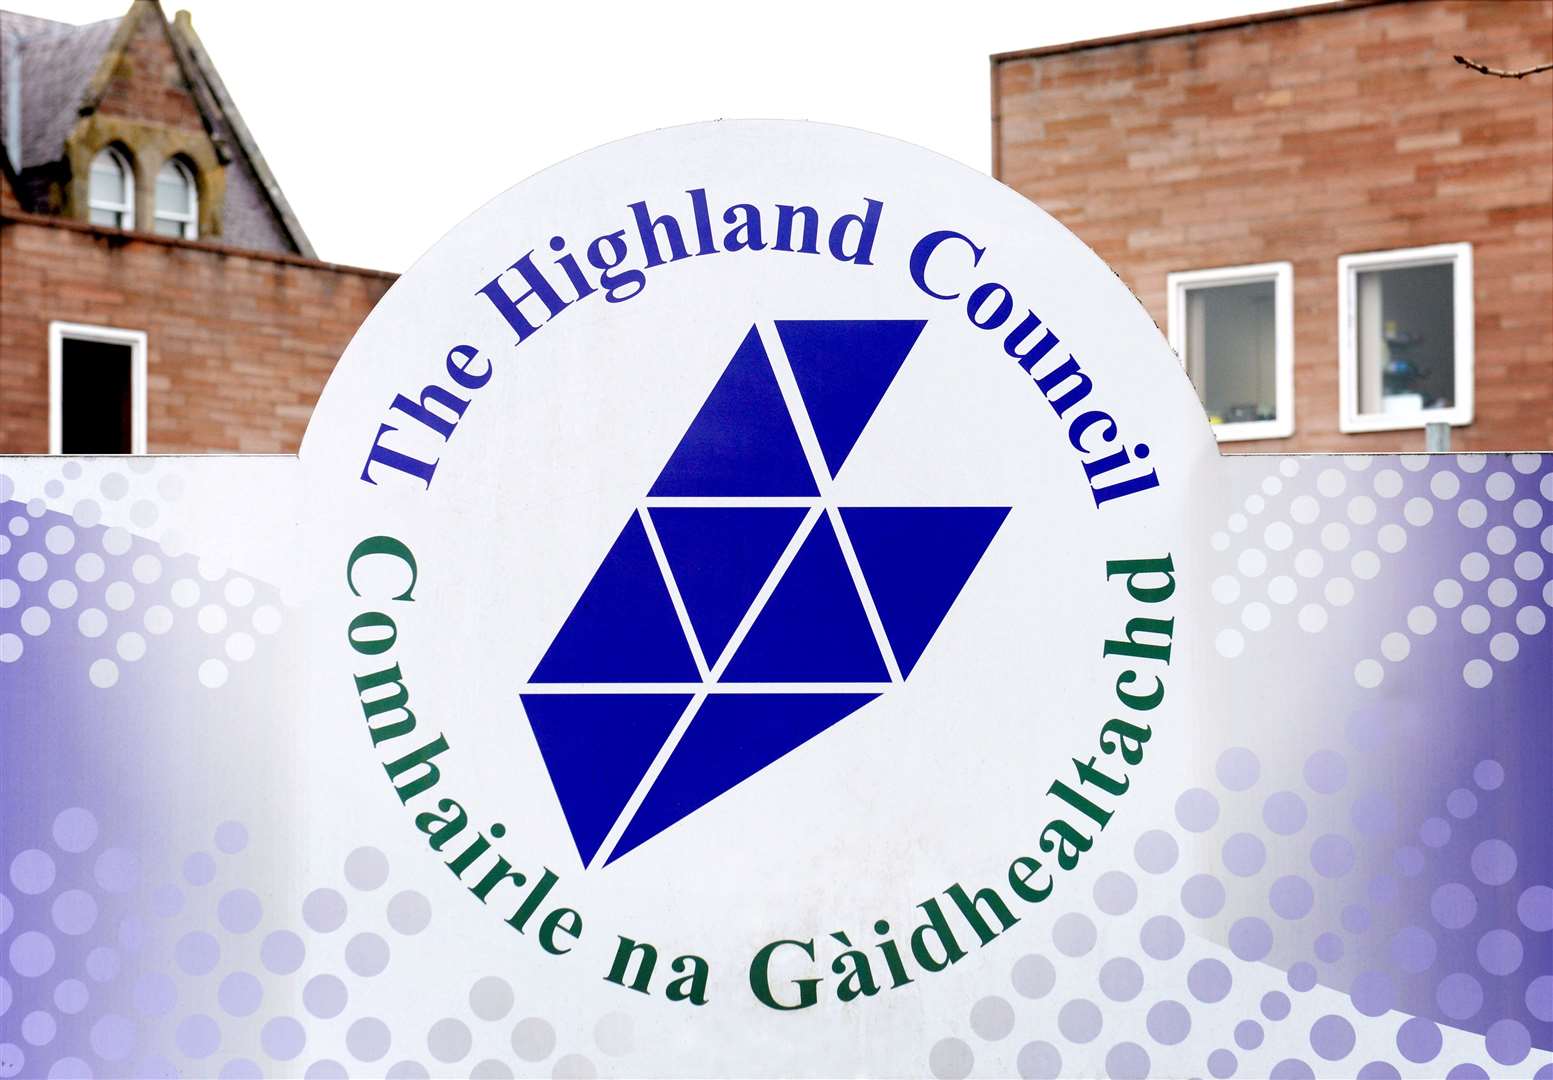 A high volume of calls to a dedicated helpline are being dealt with daily by Highland Council and Eden Court staff.